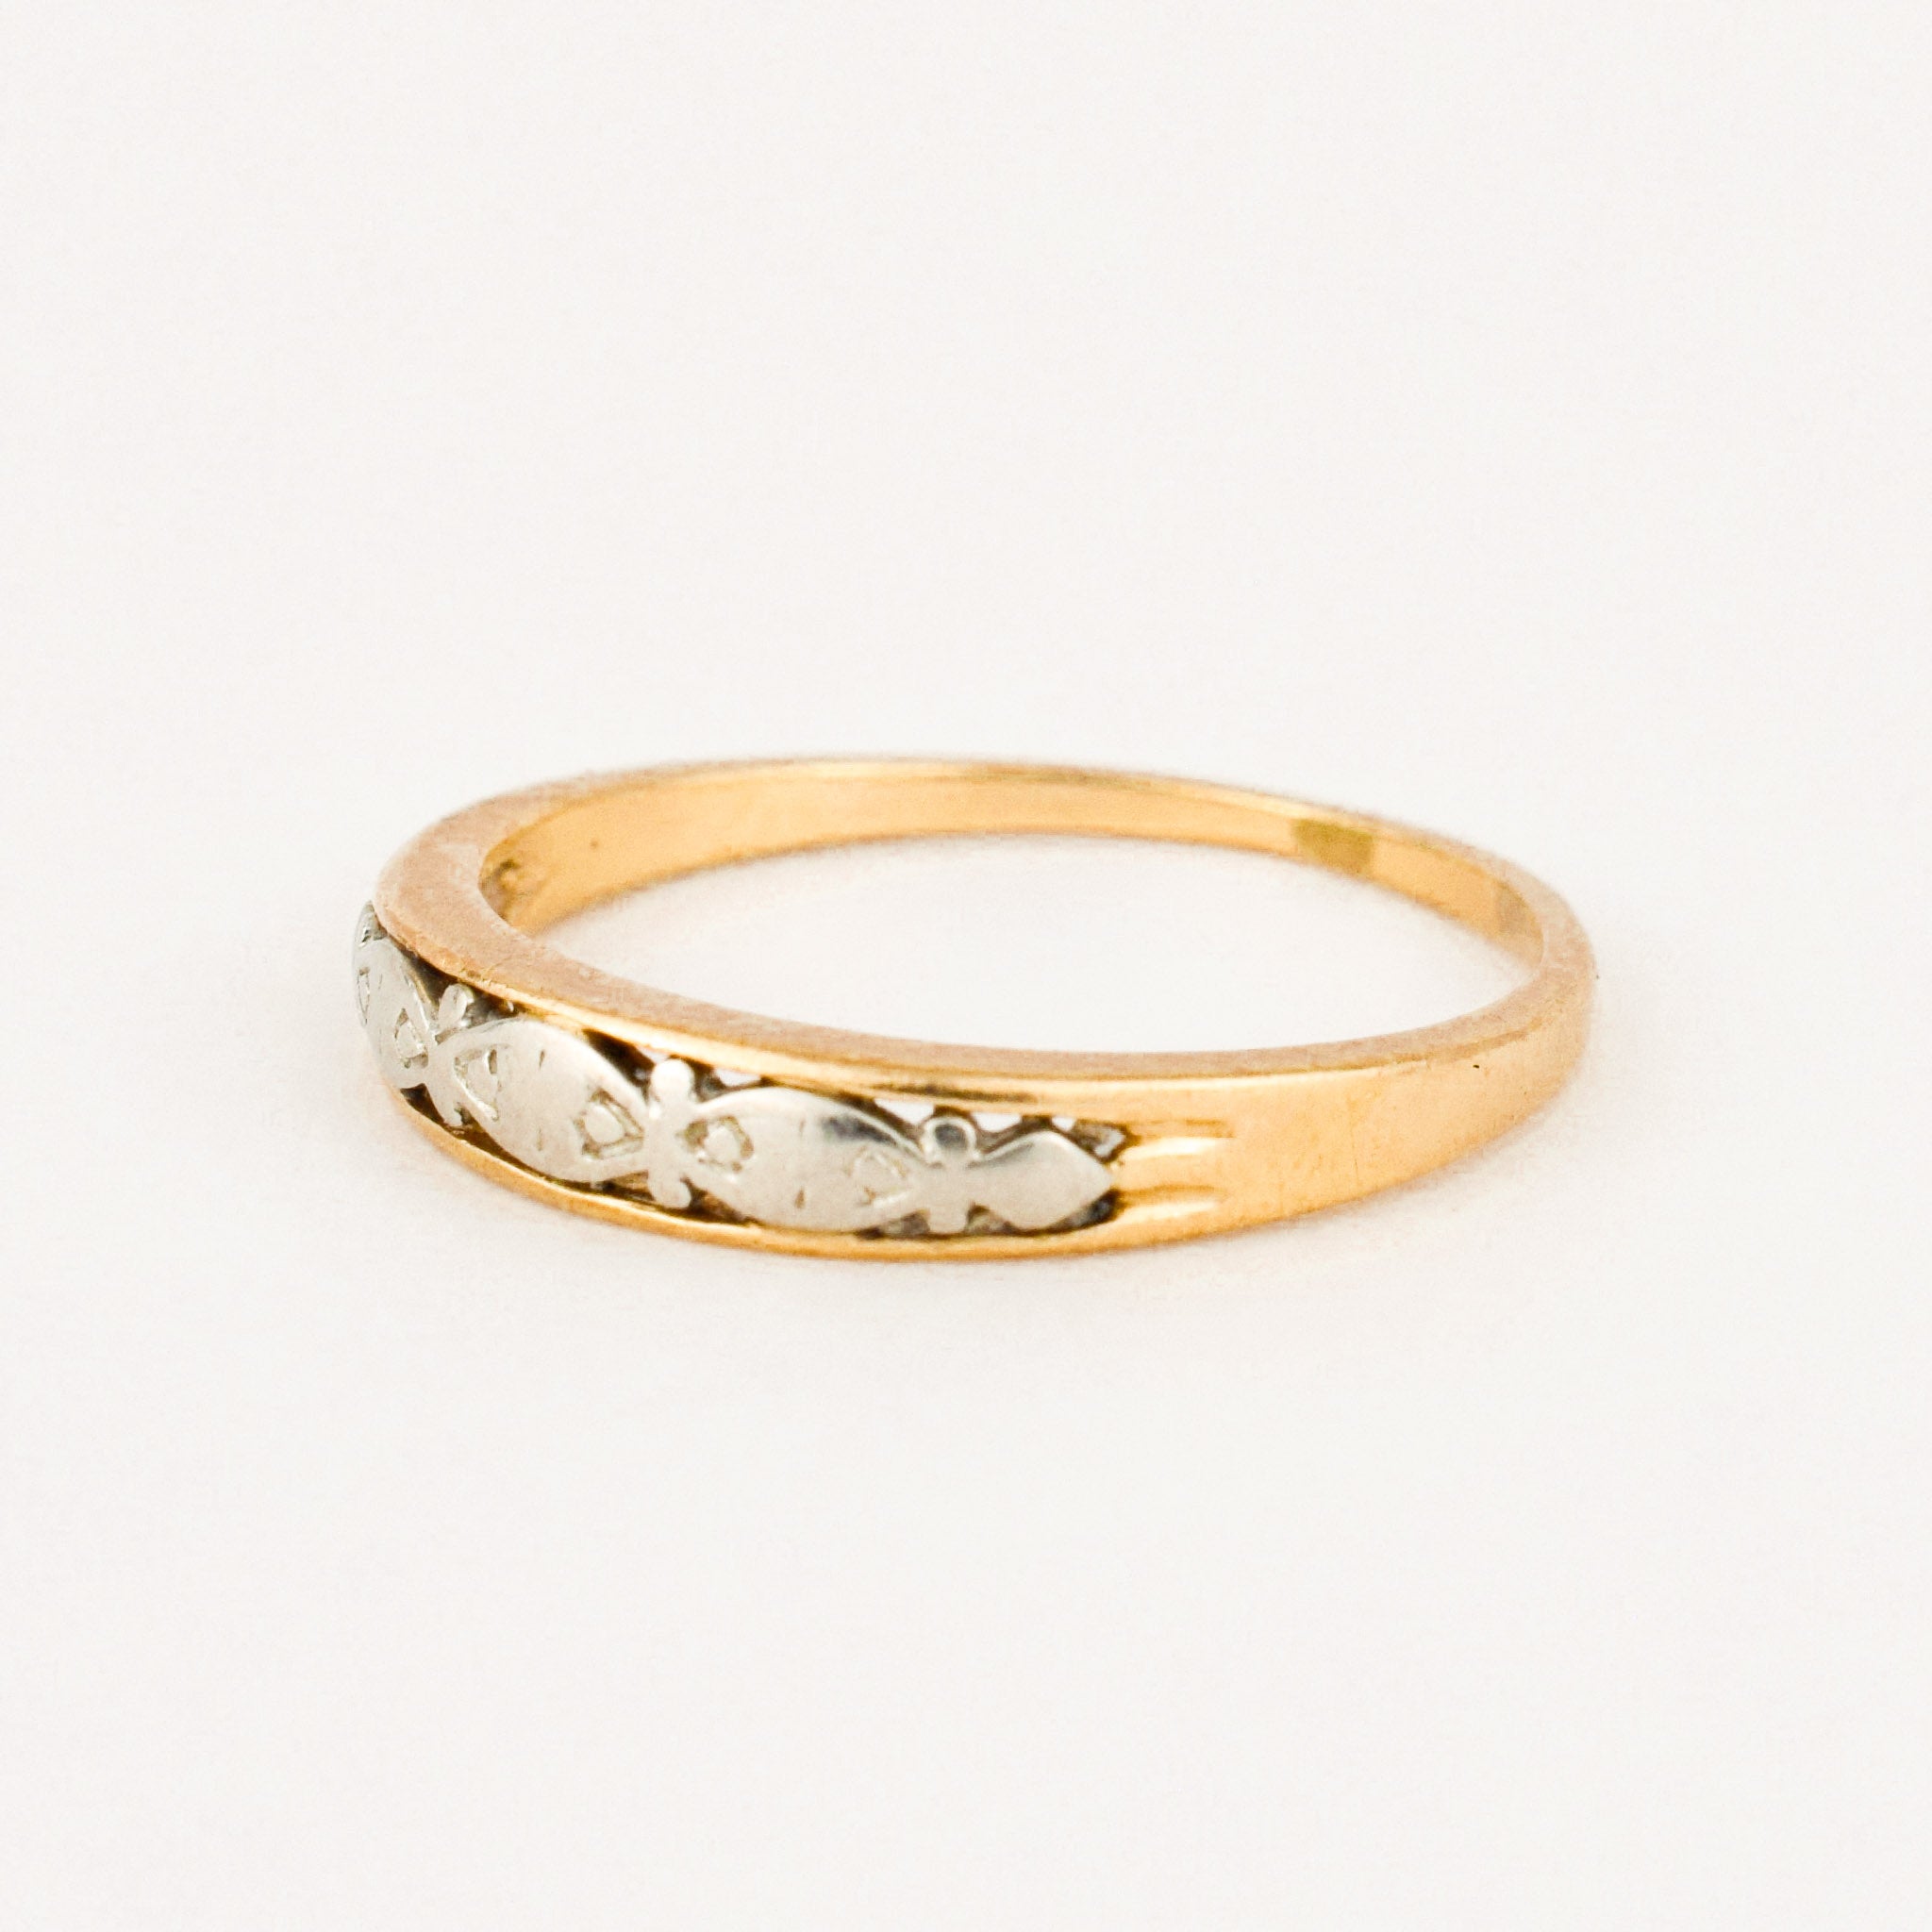 antique two toned wedding band